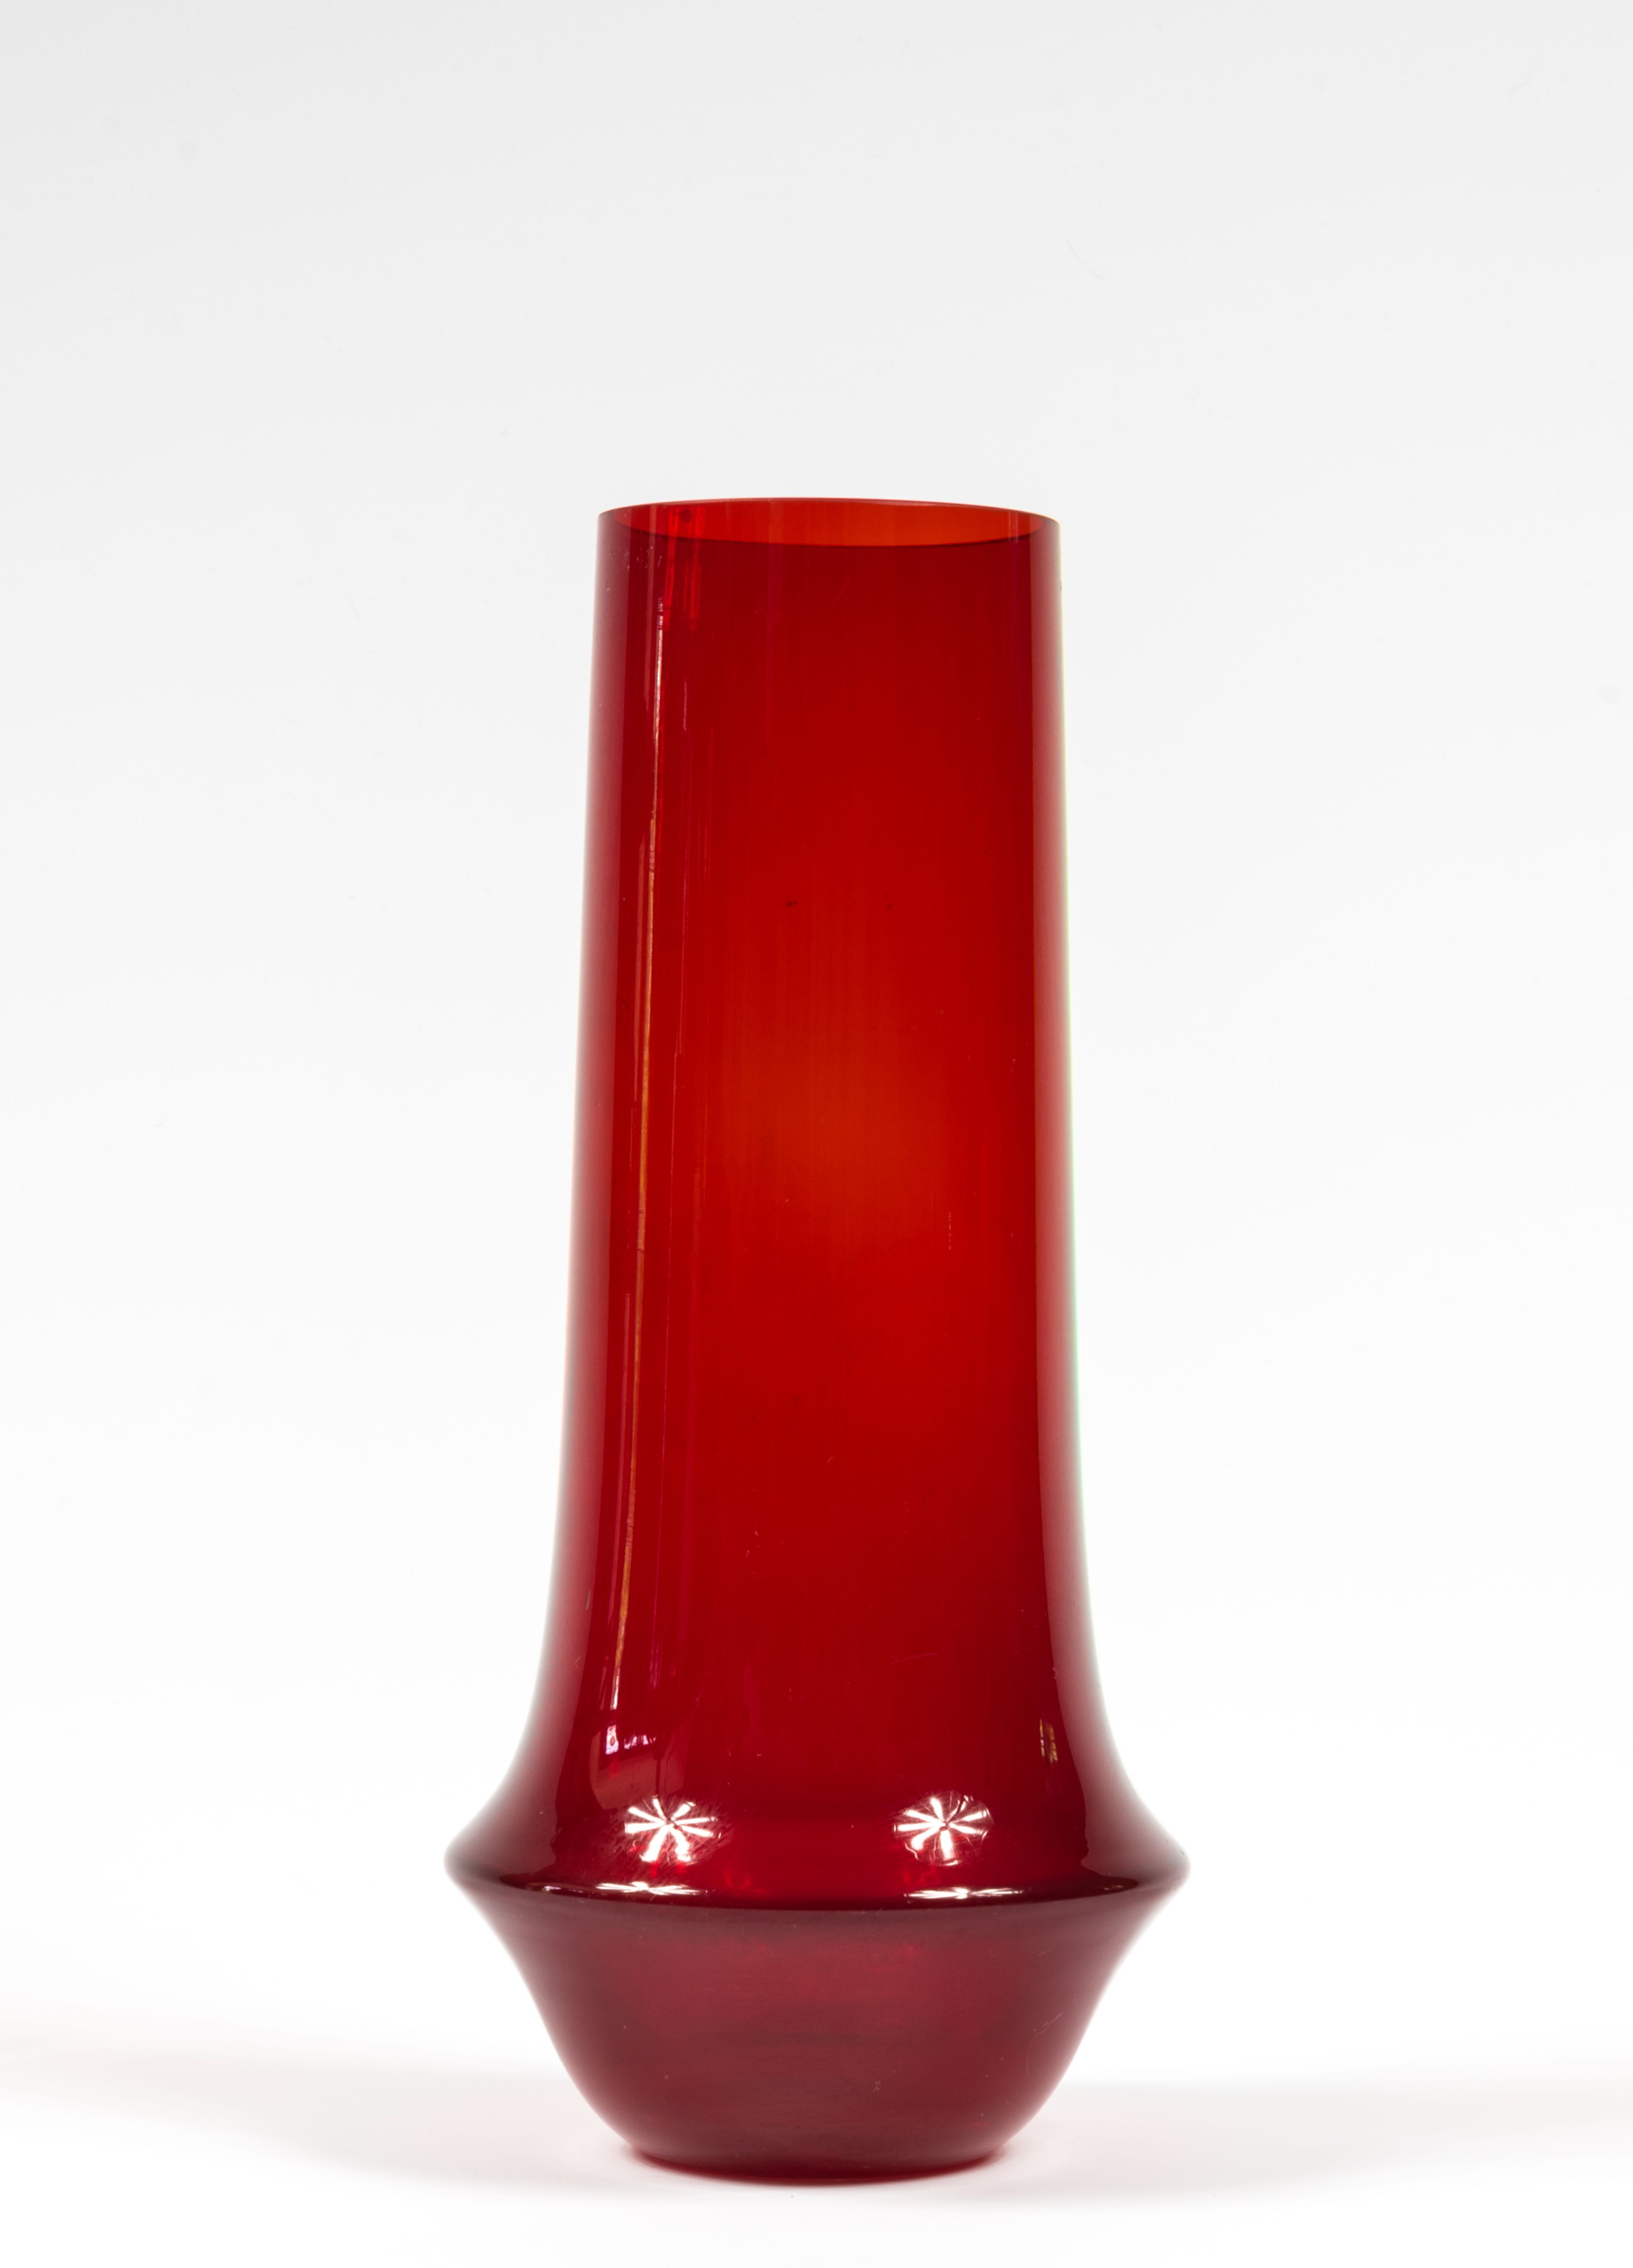 28 Awesome Large Round Clear Glass Vase 2023 free download large round clear glass vase of riihimac2a4en lasi oy riihimaki red glass vase by tamara aladin with regard to large scandinavian red glass vase designed by tamara aladin c1963 for riihimaki